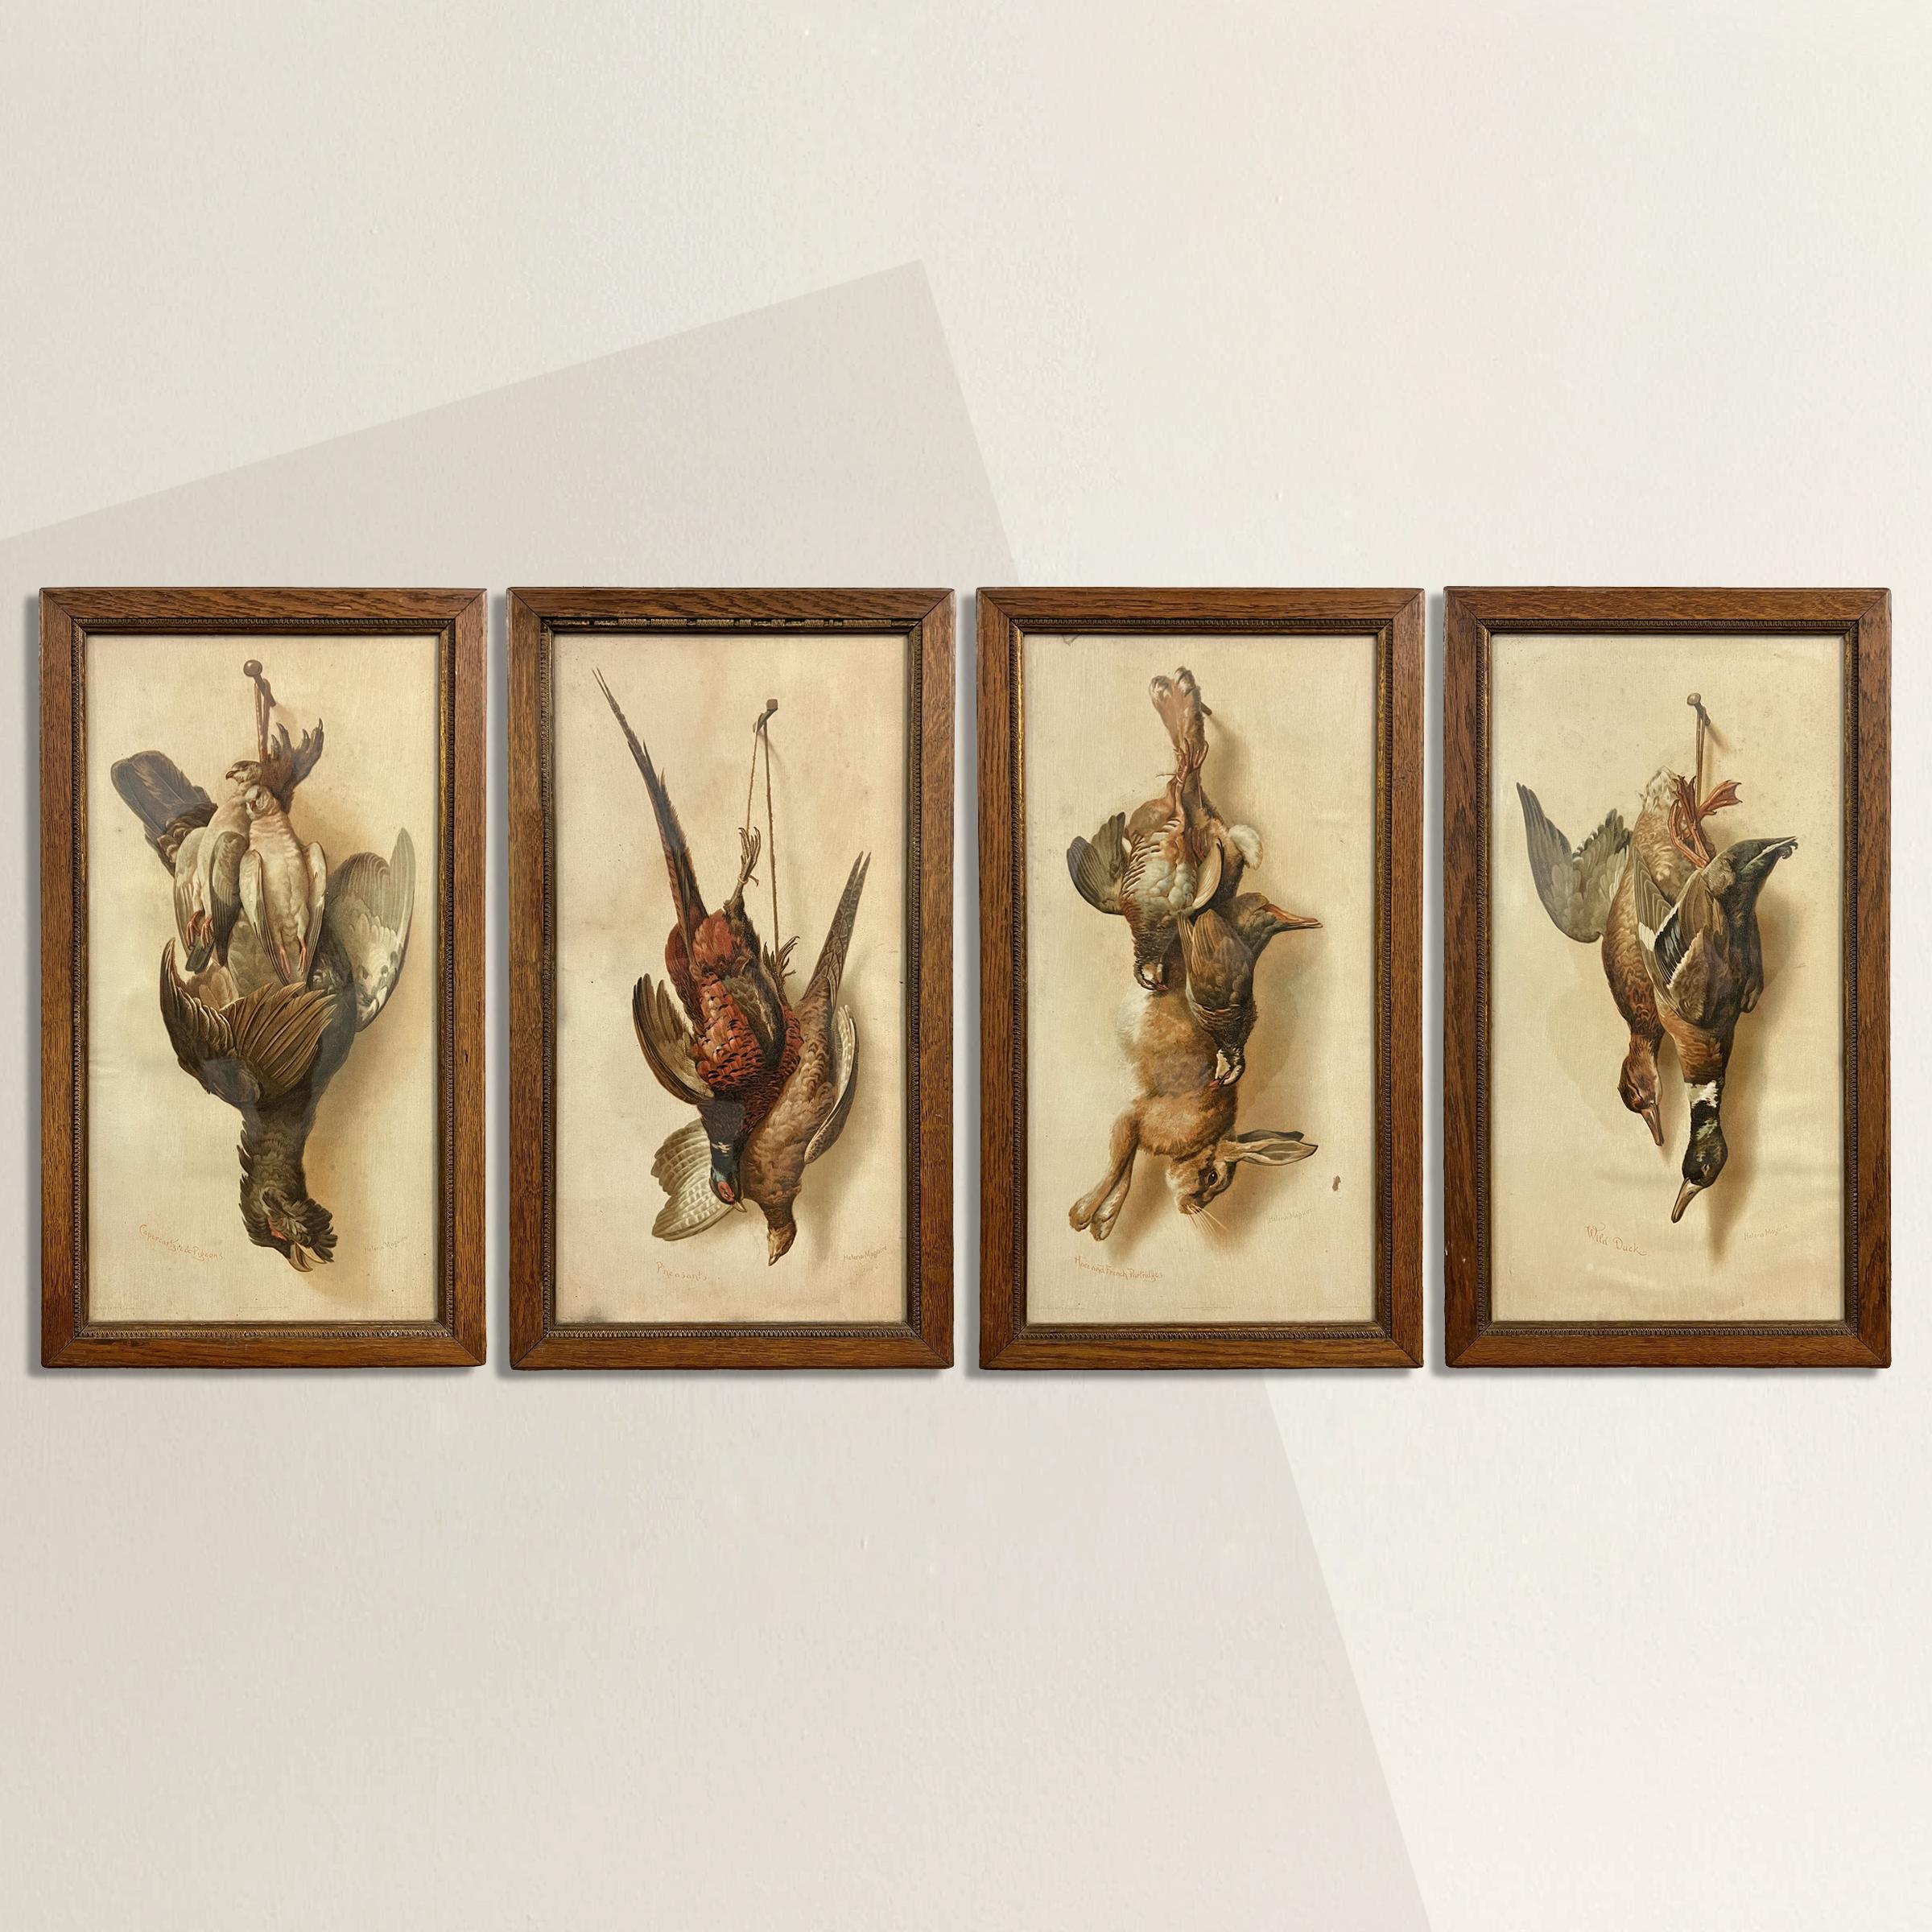 A timeless set of four 19th-century English framed lithographs by Raphael Tuck & Sons, and designed by the esteemed artist Helena Maguire. Renowned for inventing the post card industry as we know it, Maguire's meticulous attention to detail breathes